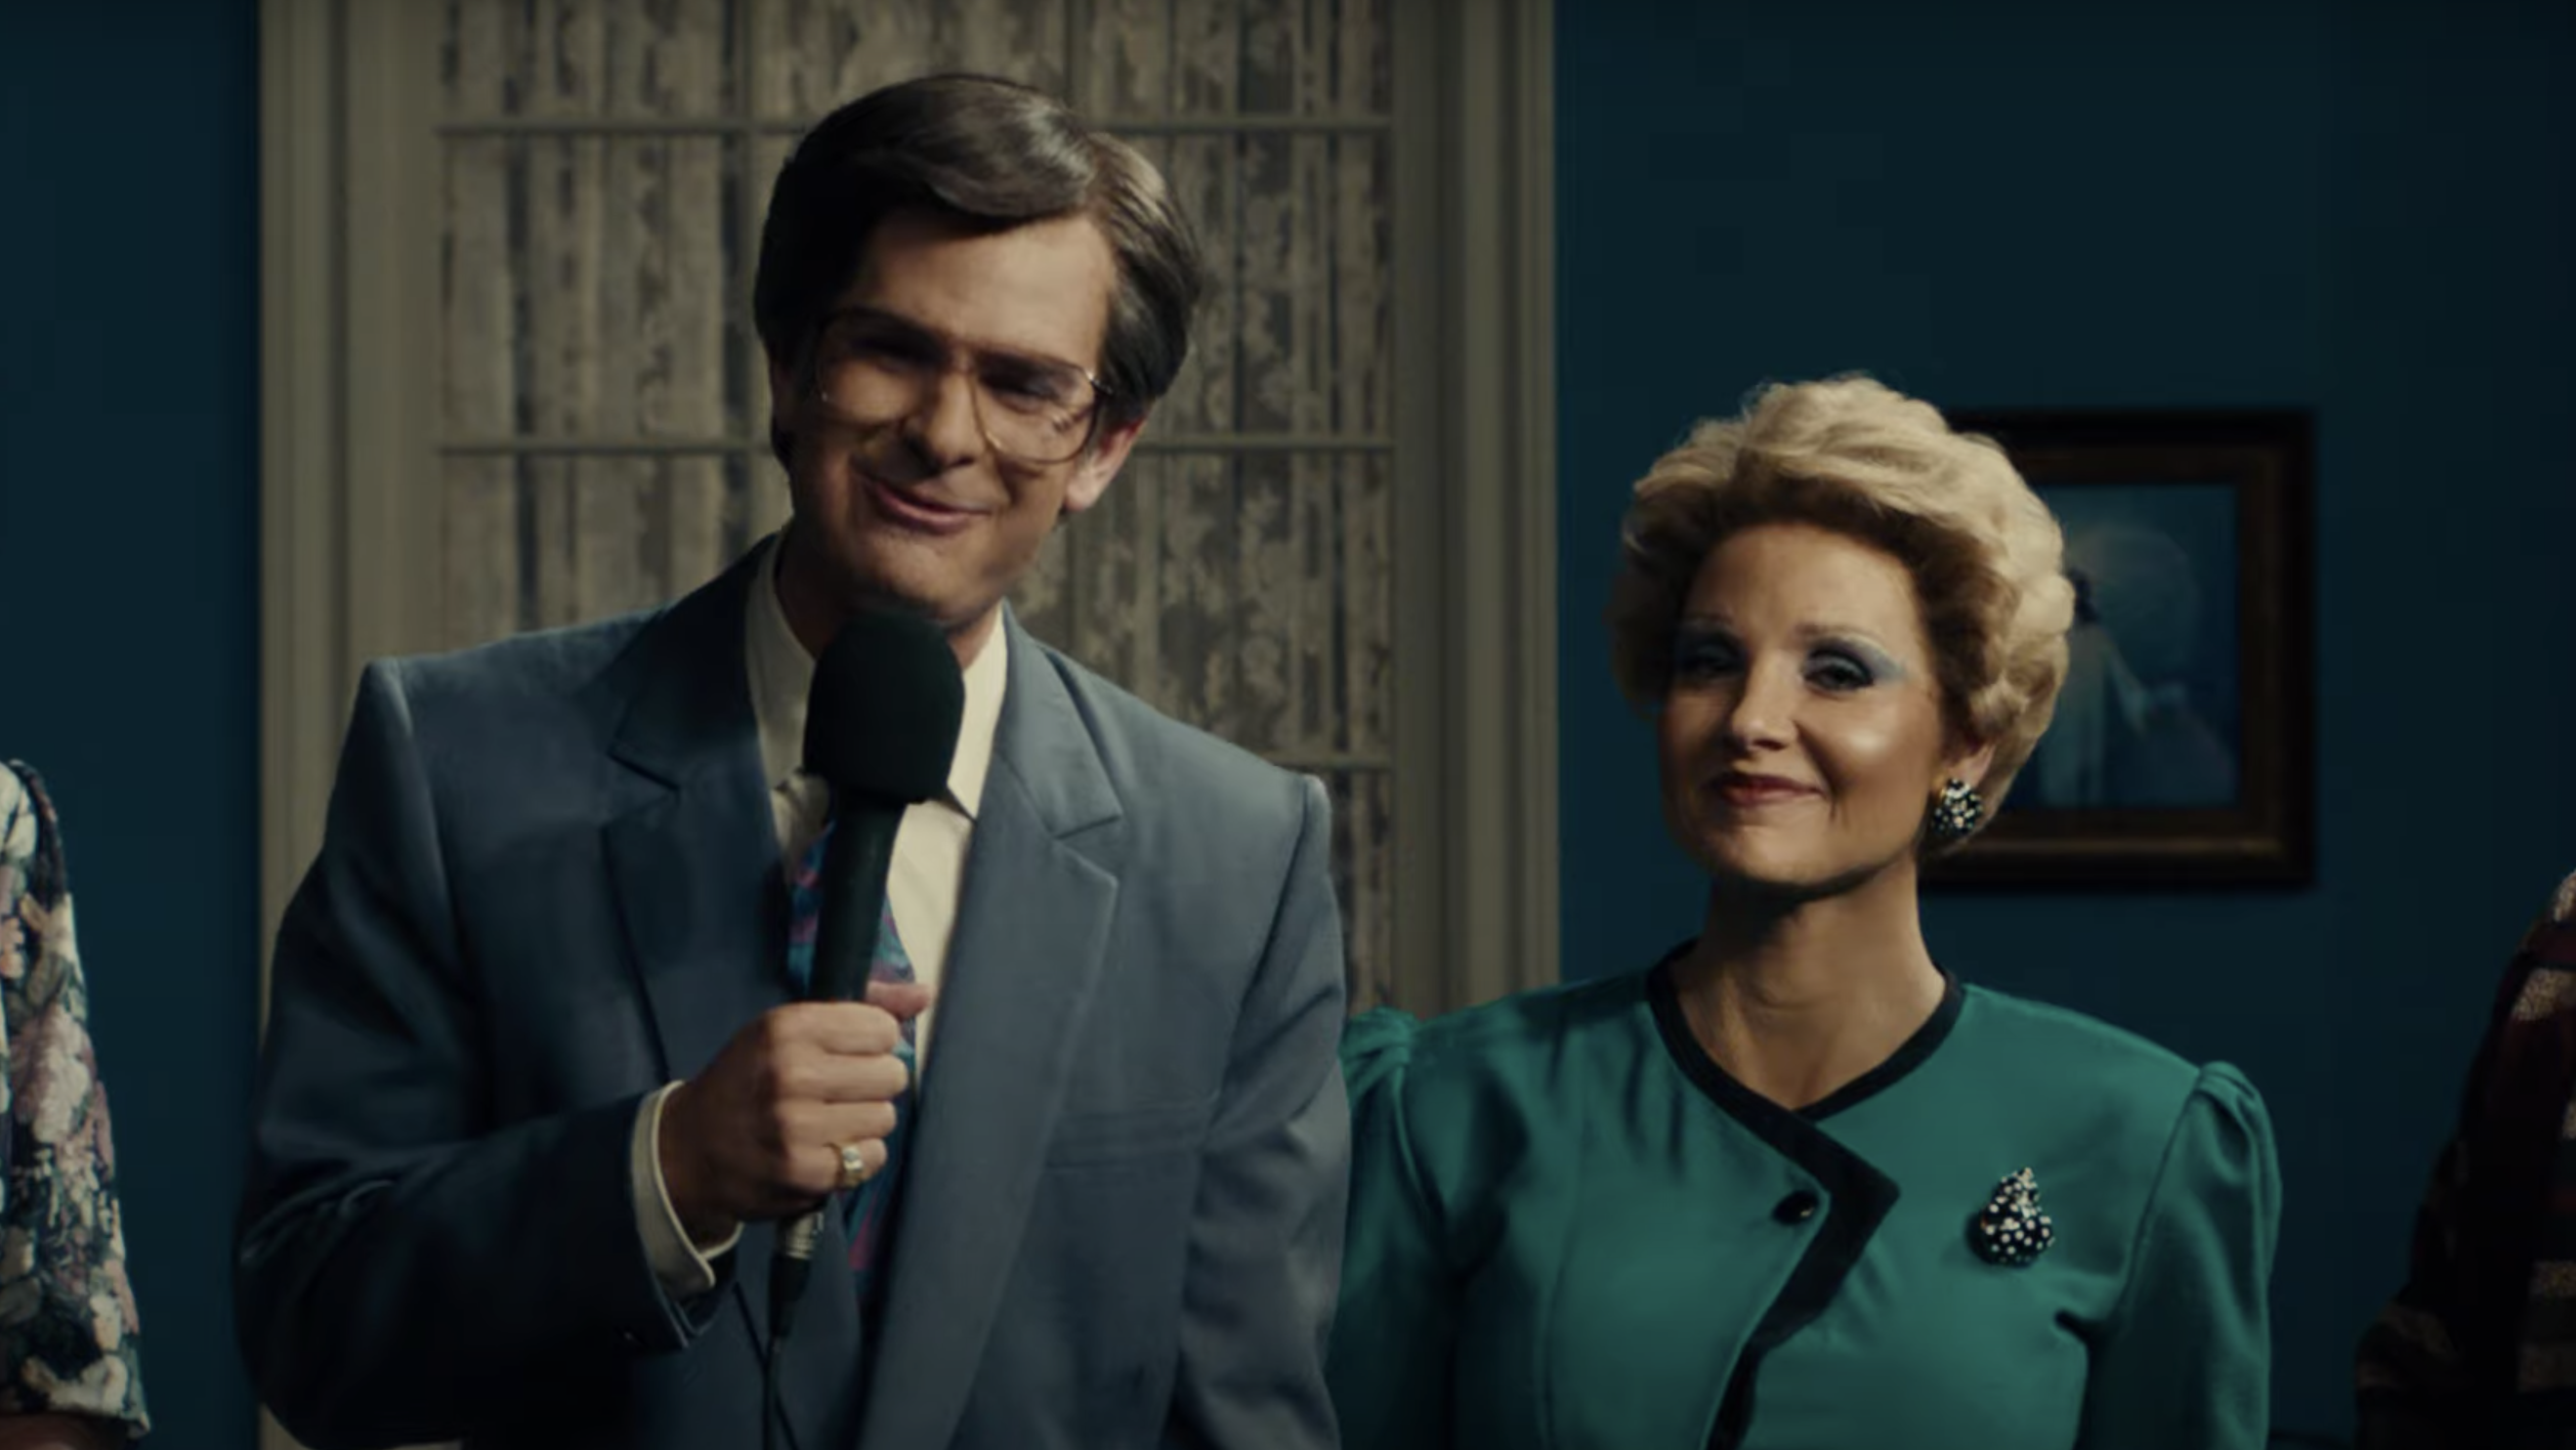 Jessica Chastain and Andrew Garfield suit up as superstar televangelists in The Eyes Of Tammy Faye trailer